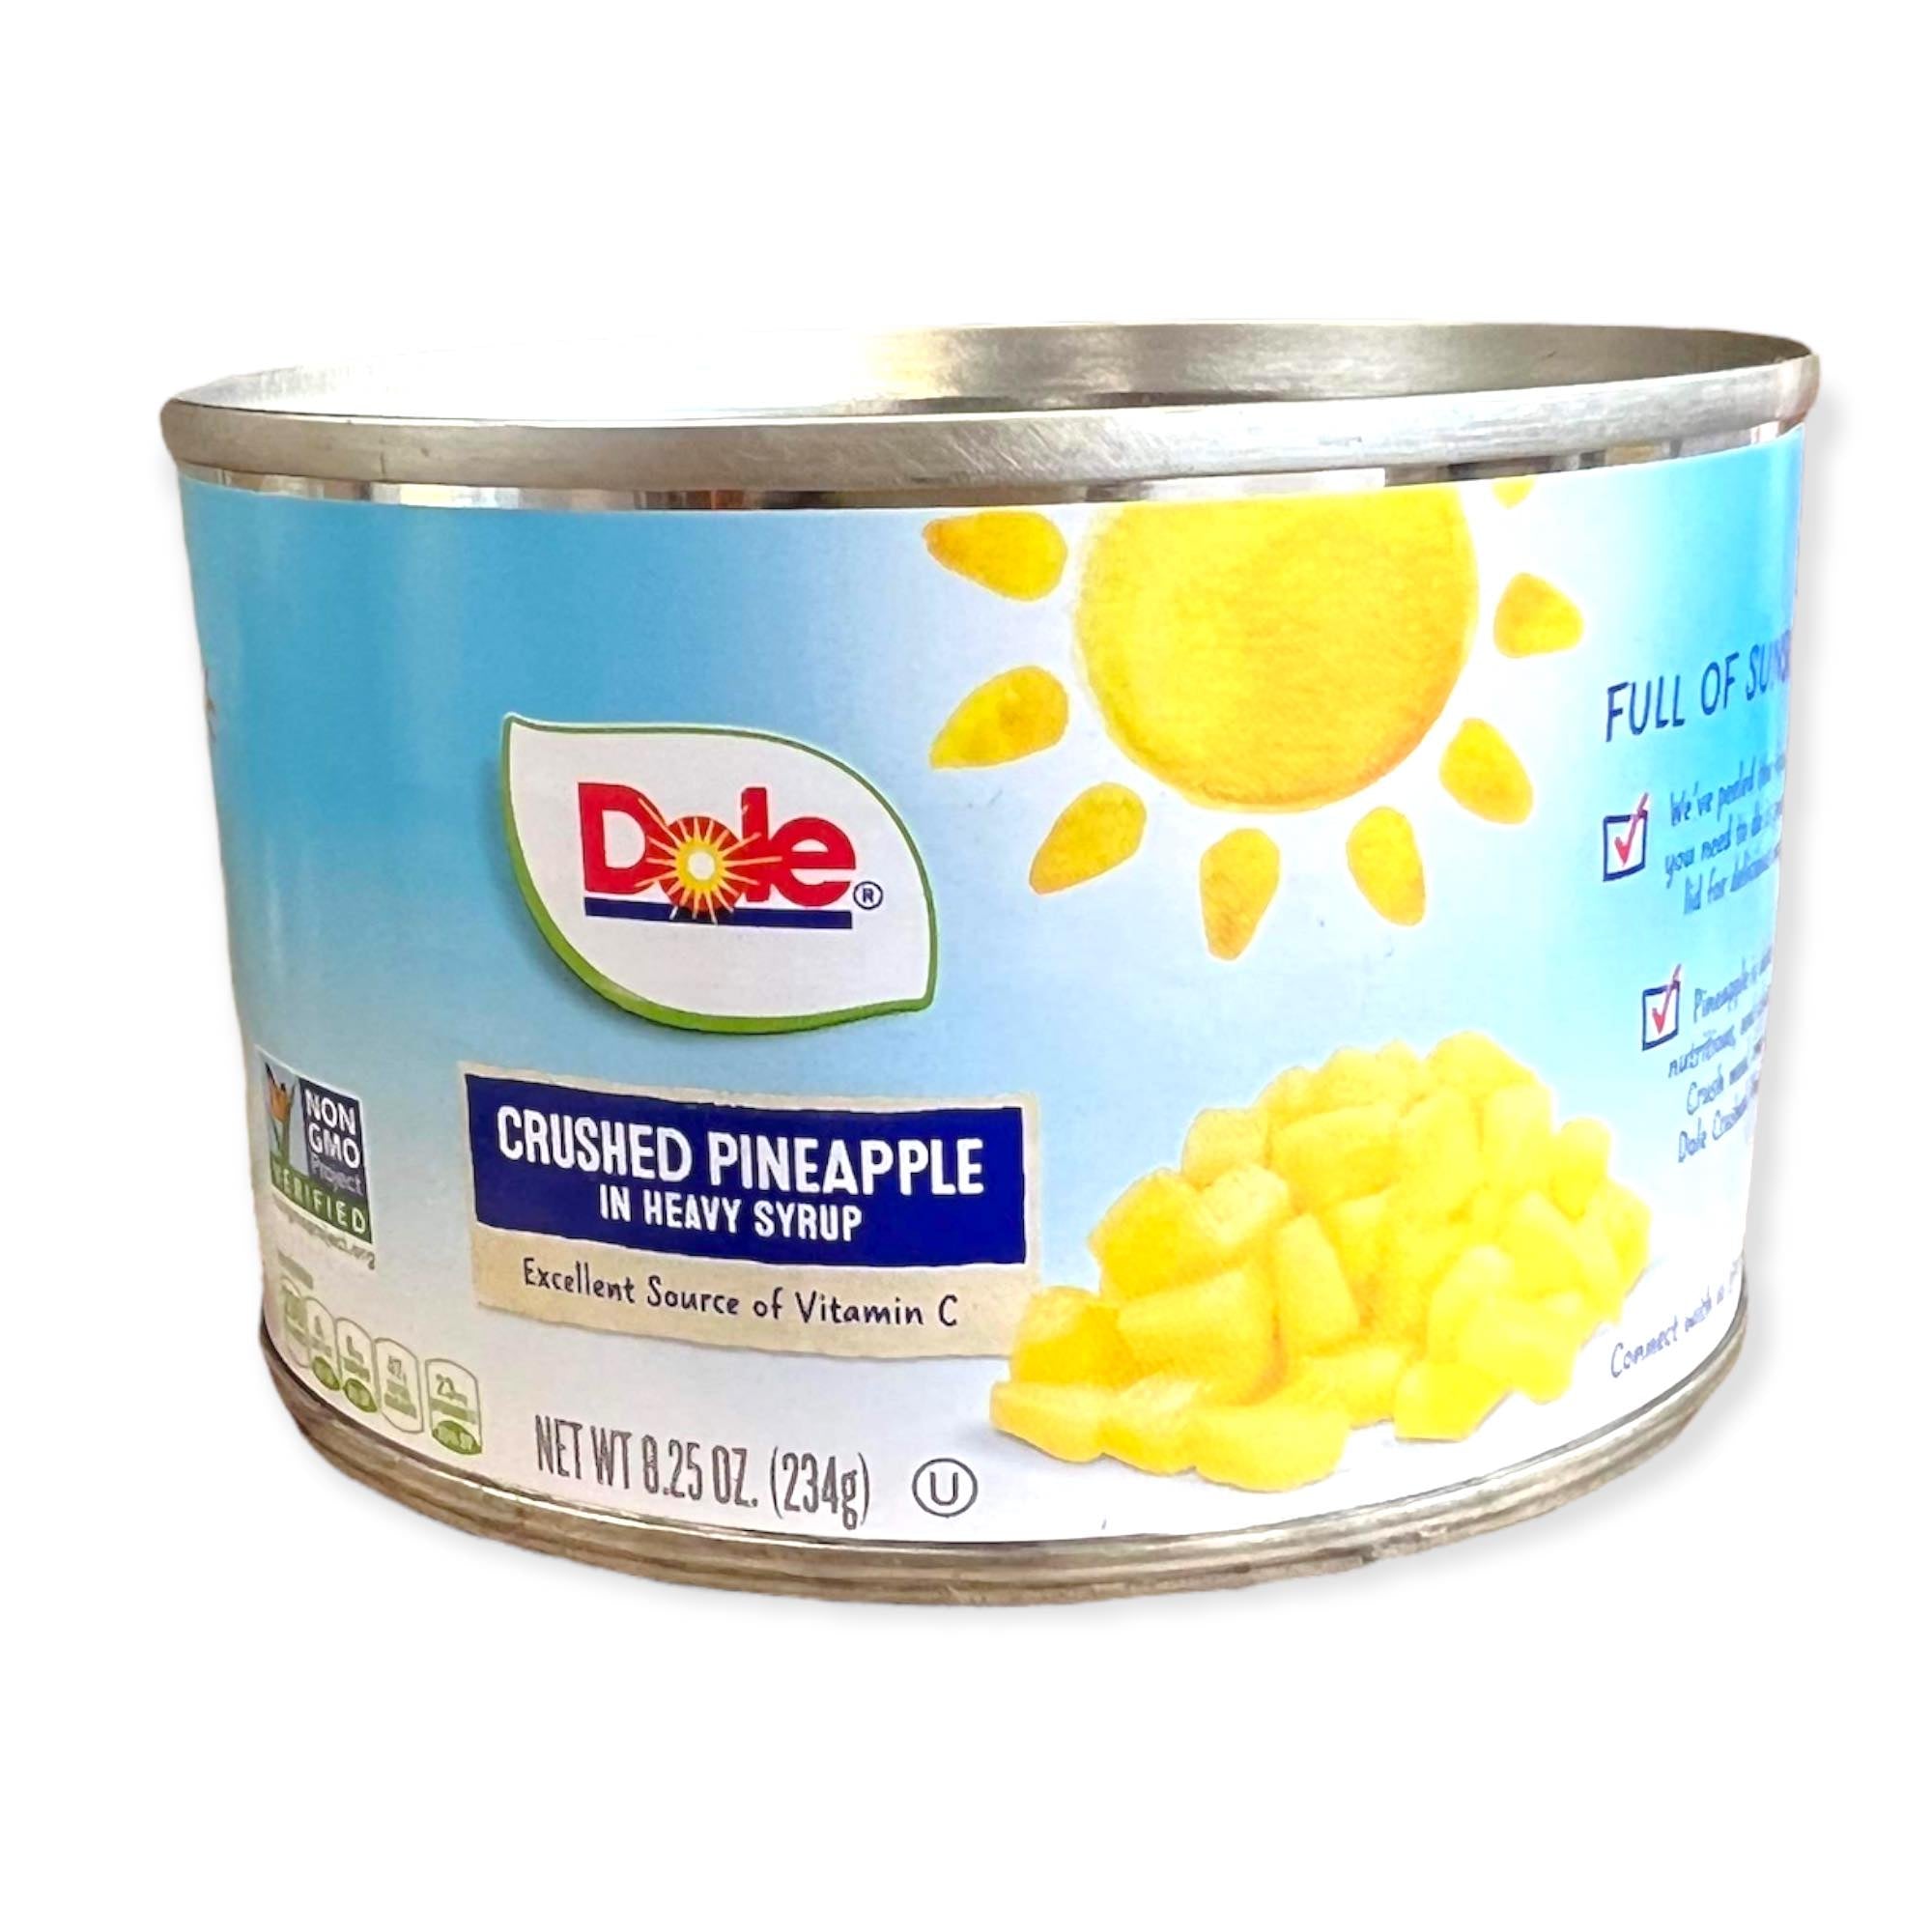 Dole - Pineapple Crushed in Syrup